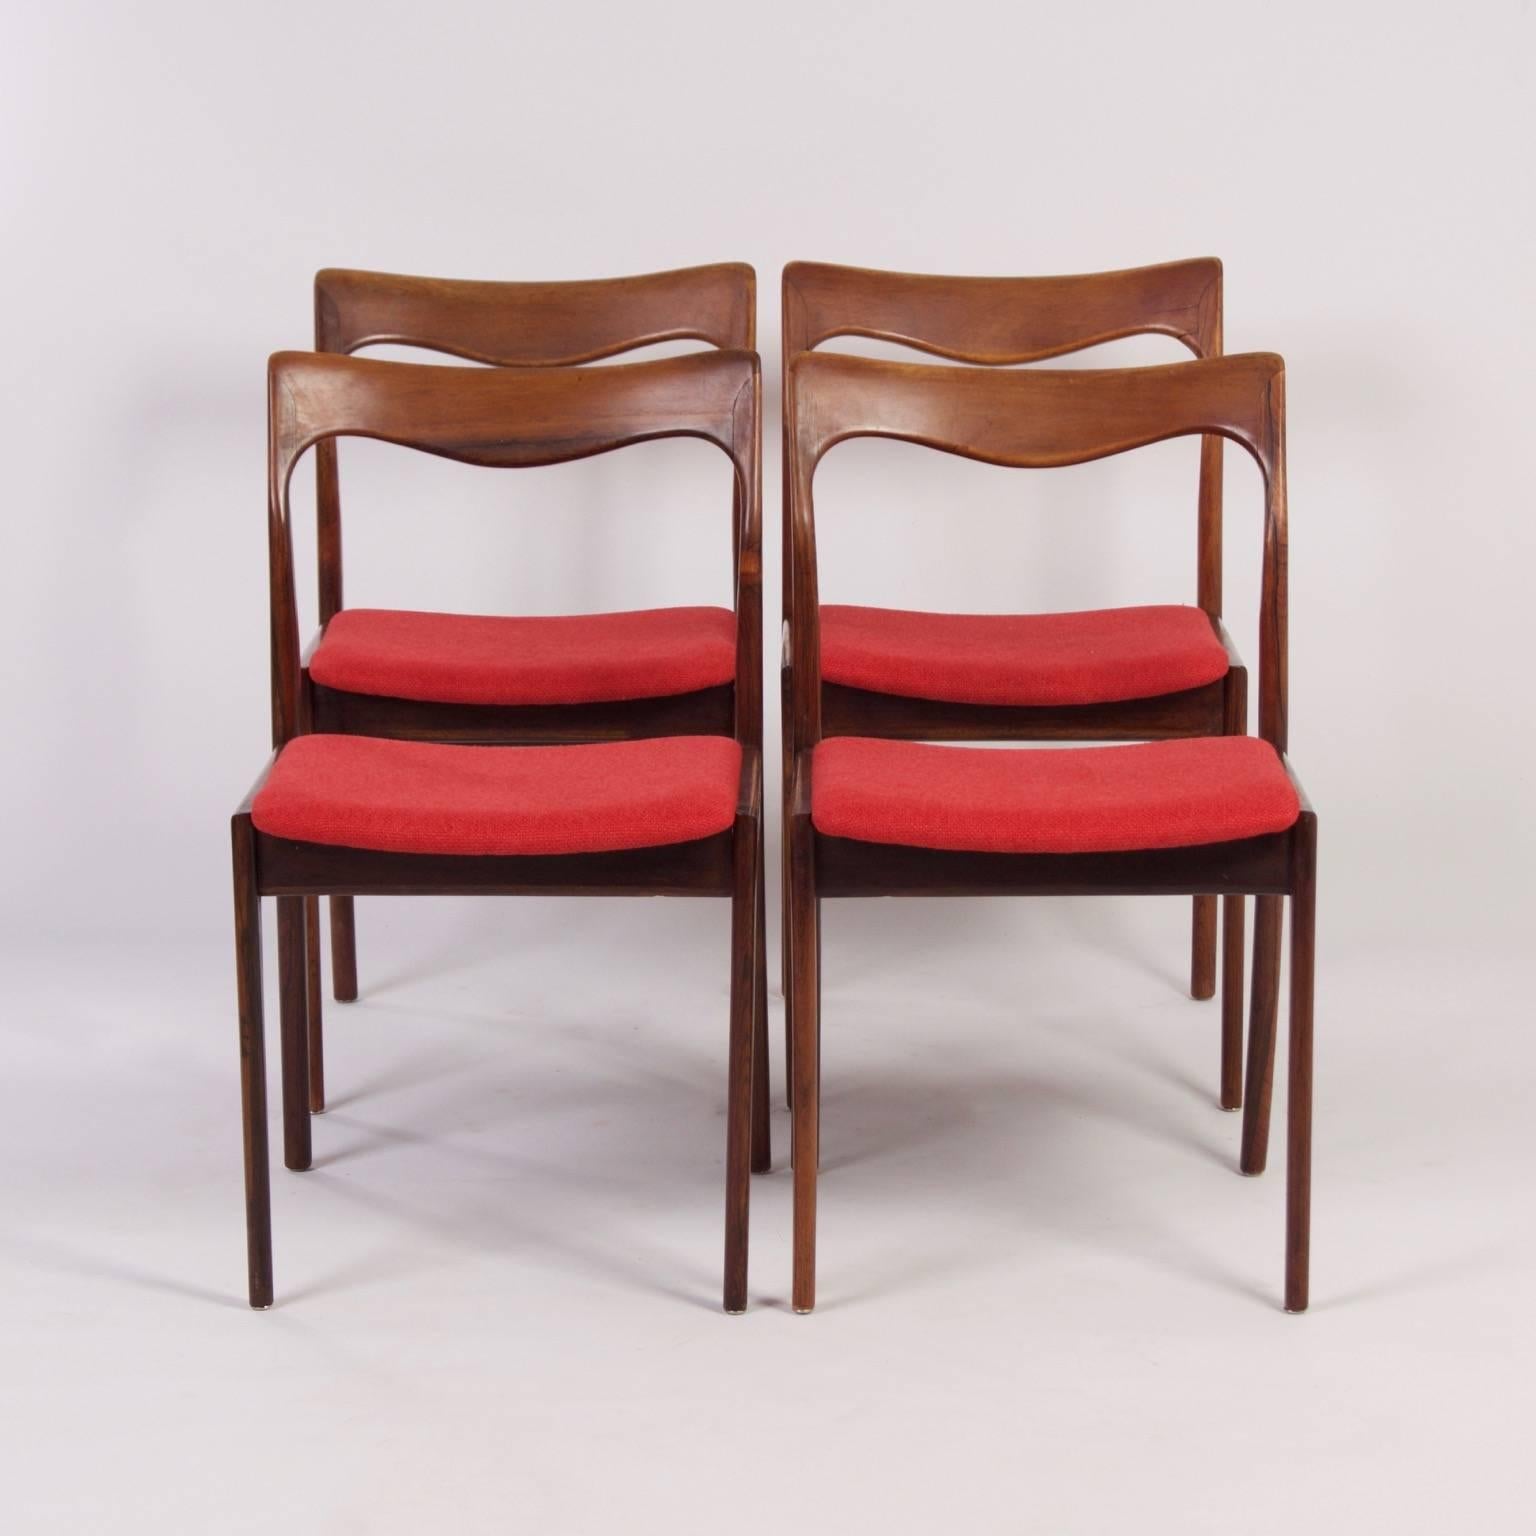 Red rosewood dining chairs designed by the Dutch furniture factory AWA, circa 1960. The rosewood frames have a very nice wood grain. Considering its age these chairs are still in very good condition. The chairs have been re-upholstered with red